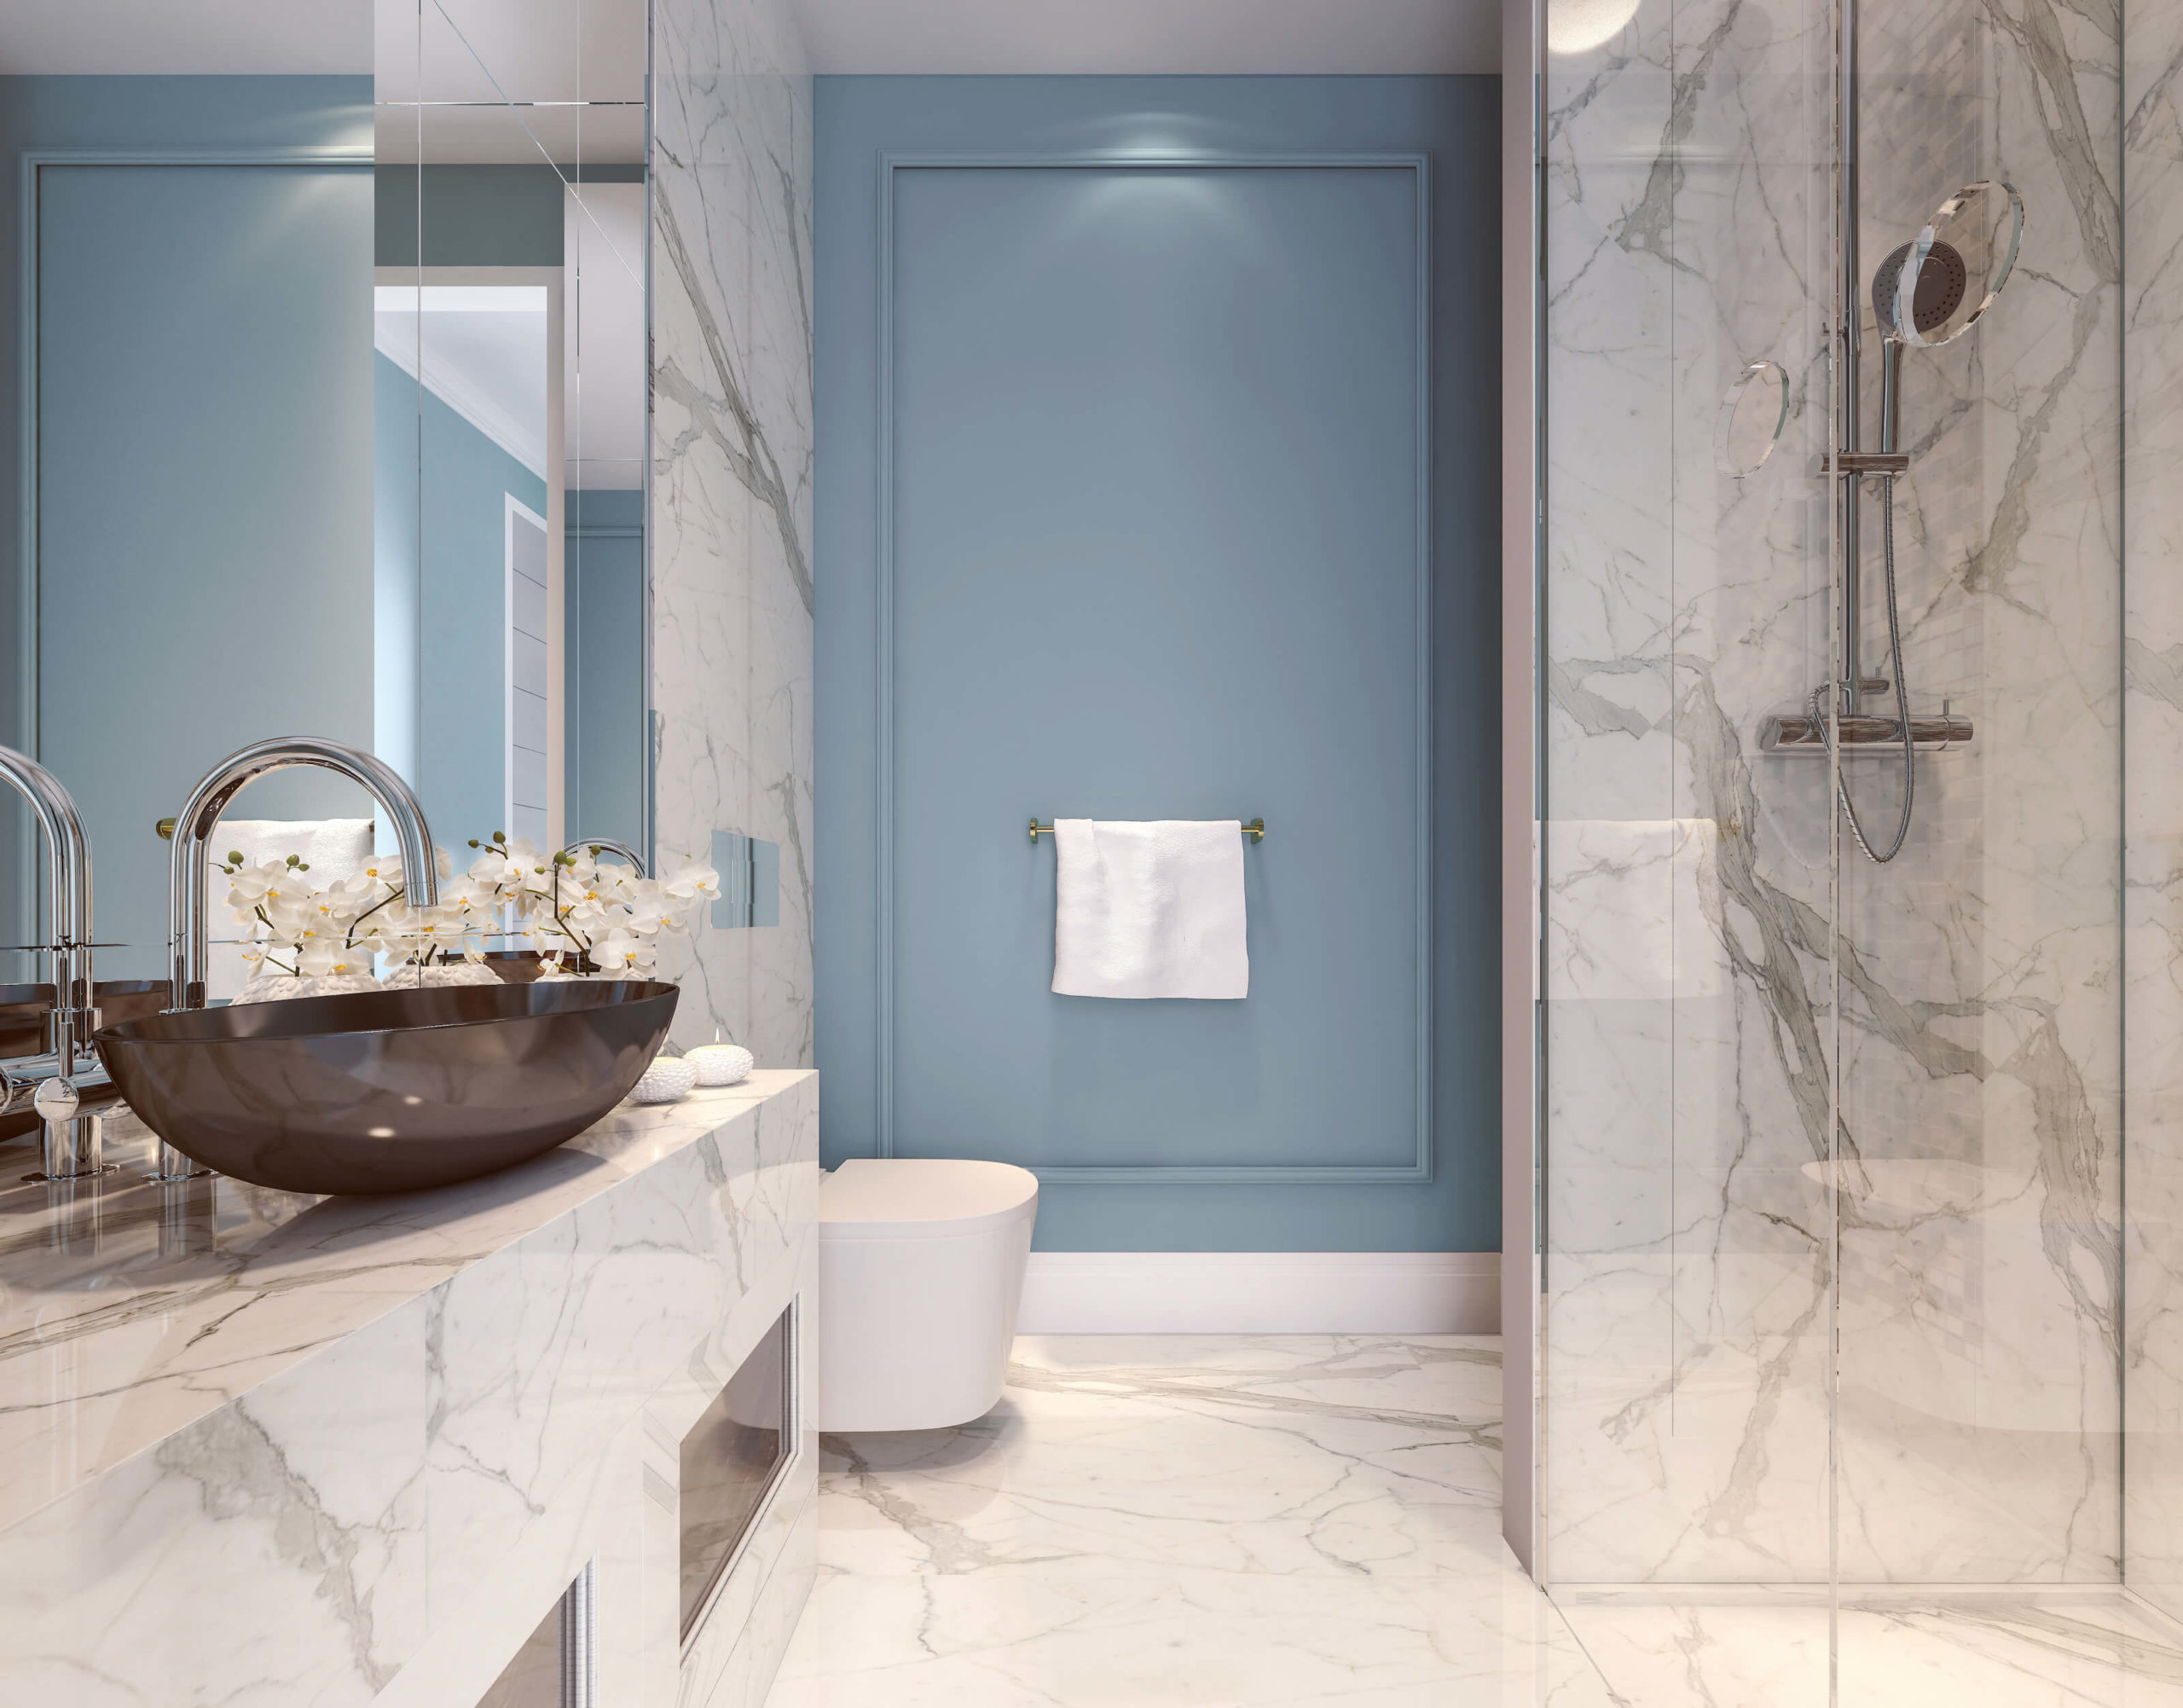 Top Bathroom Design Trends - soothing colors